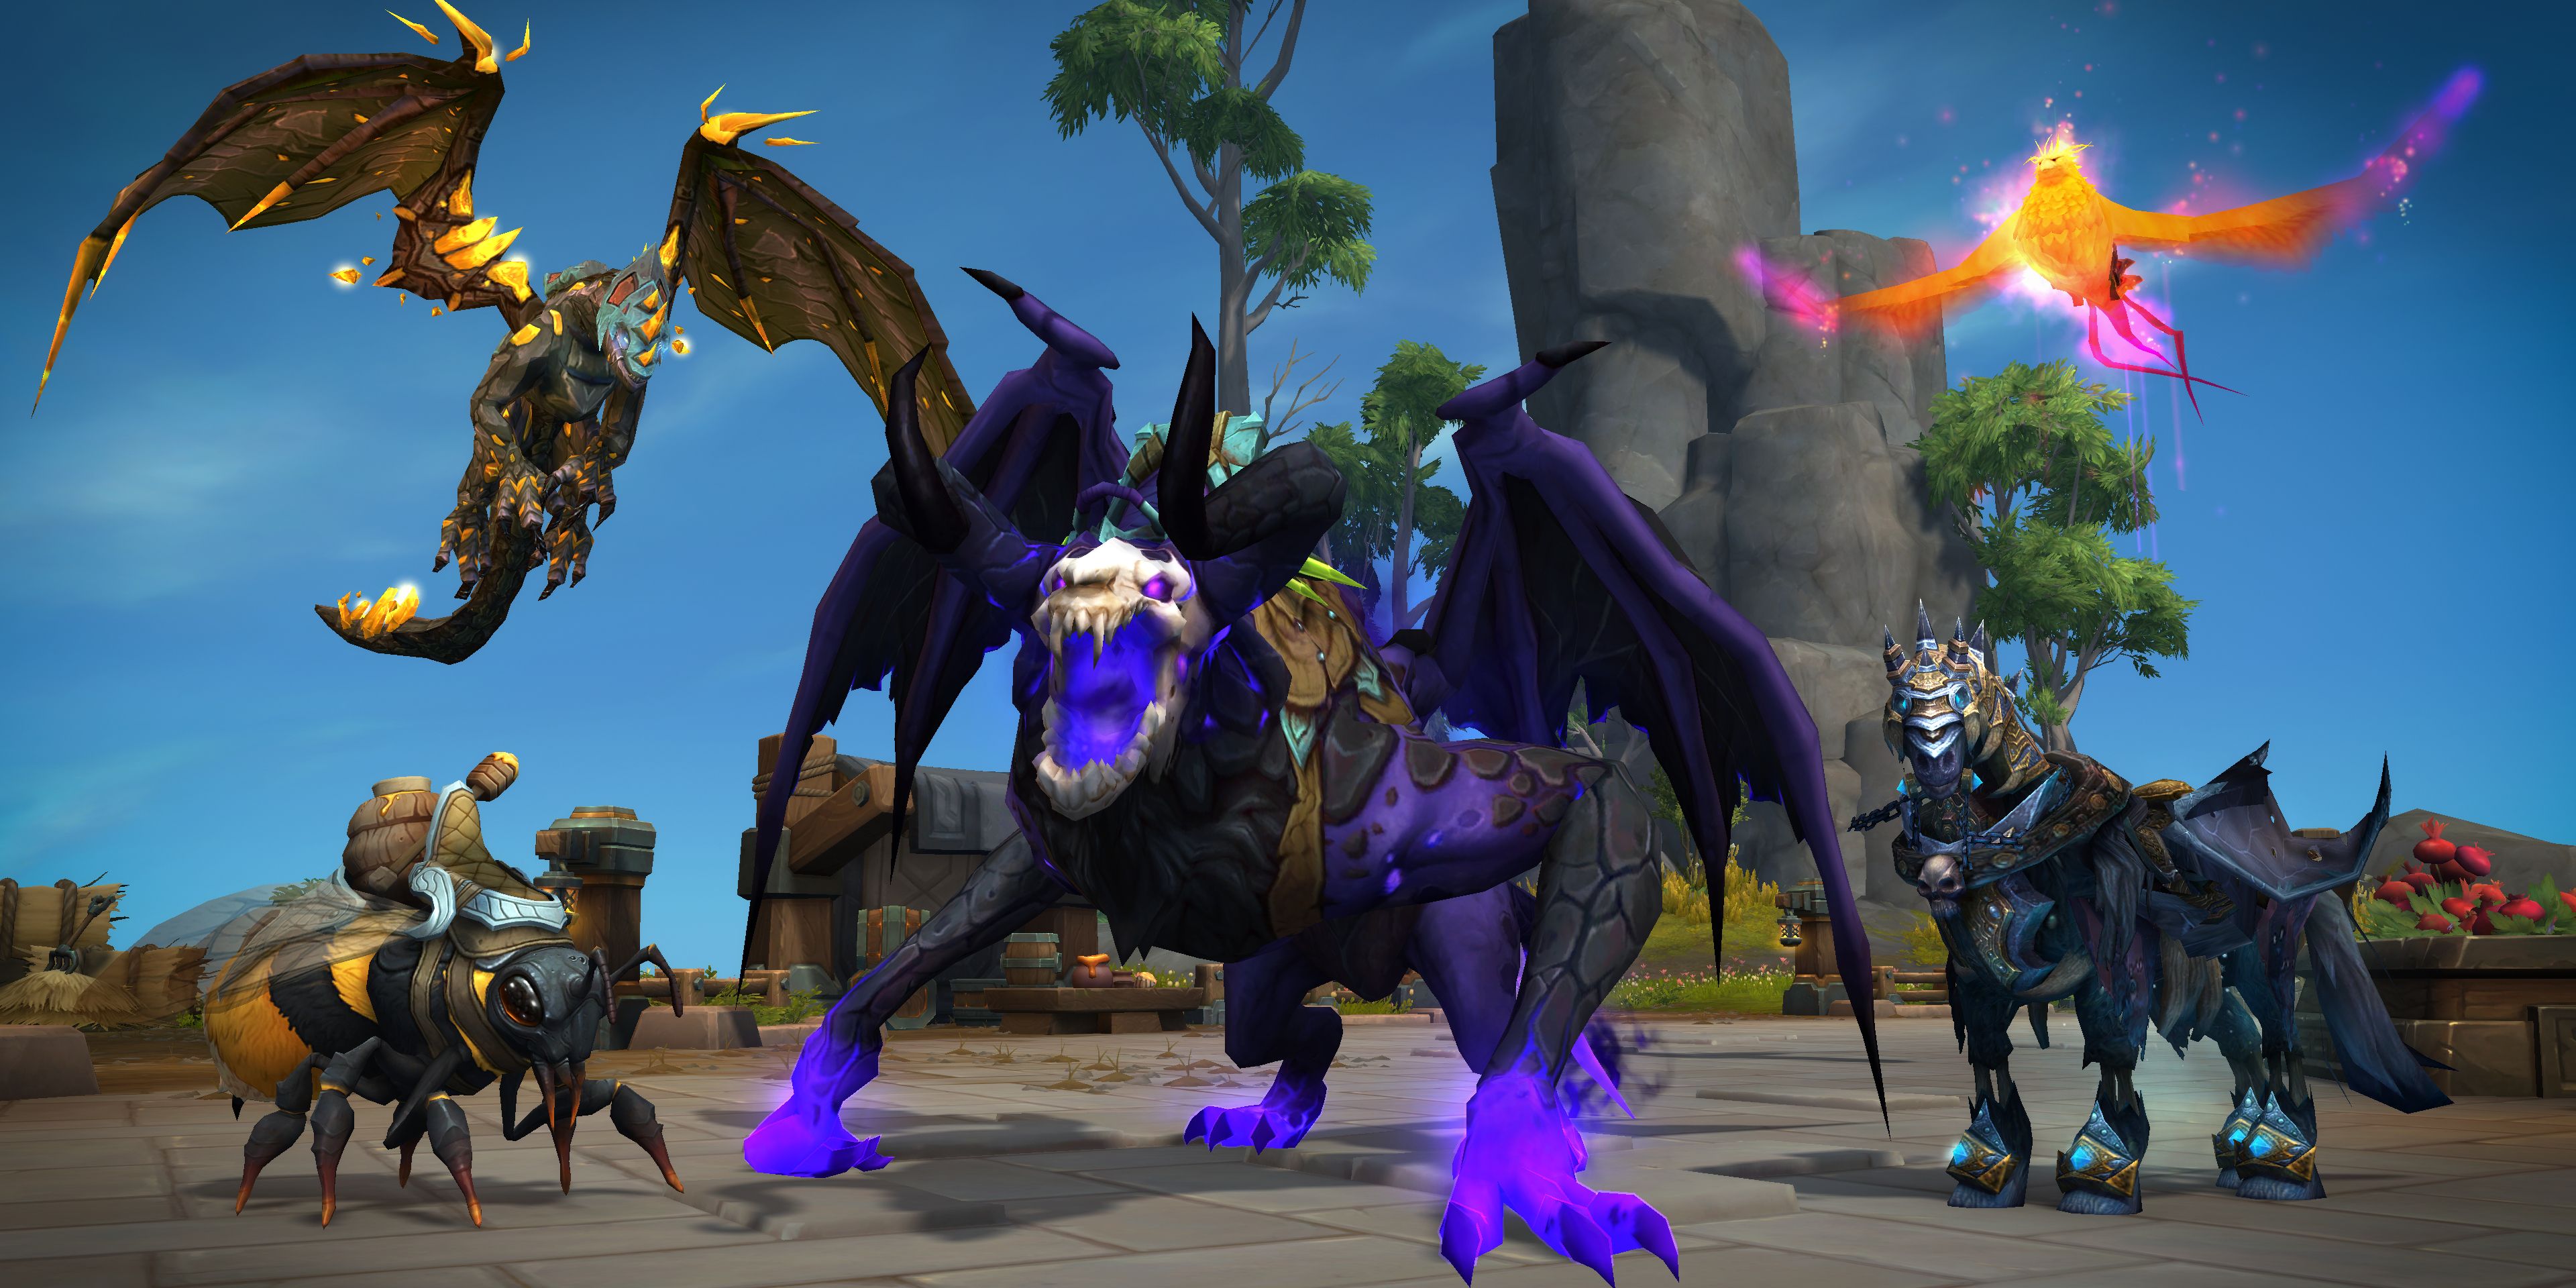 flying mounts from wow the war within including al'ar invincible stone drake